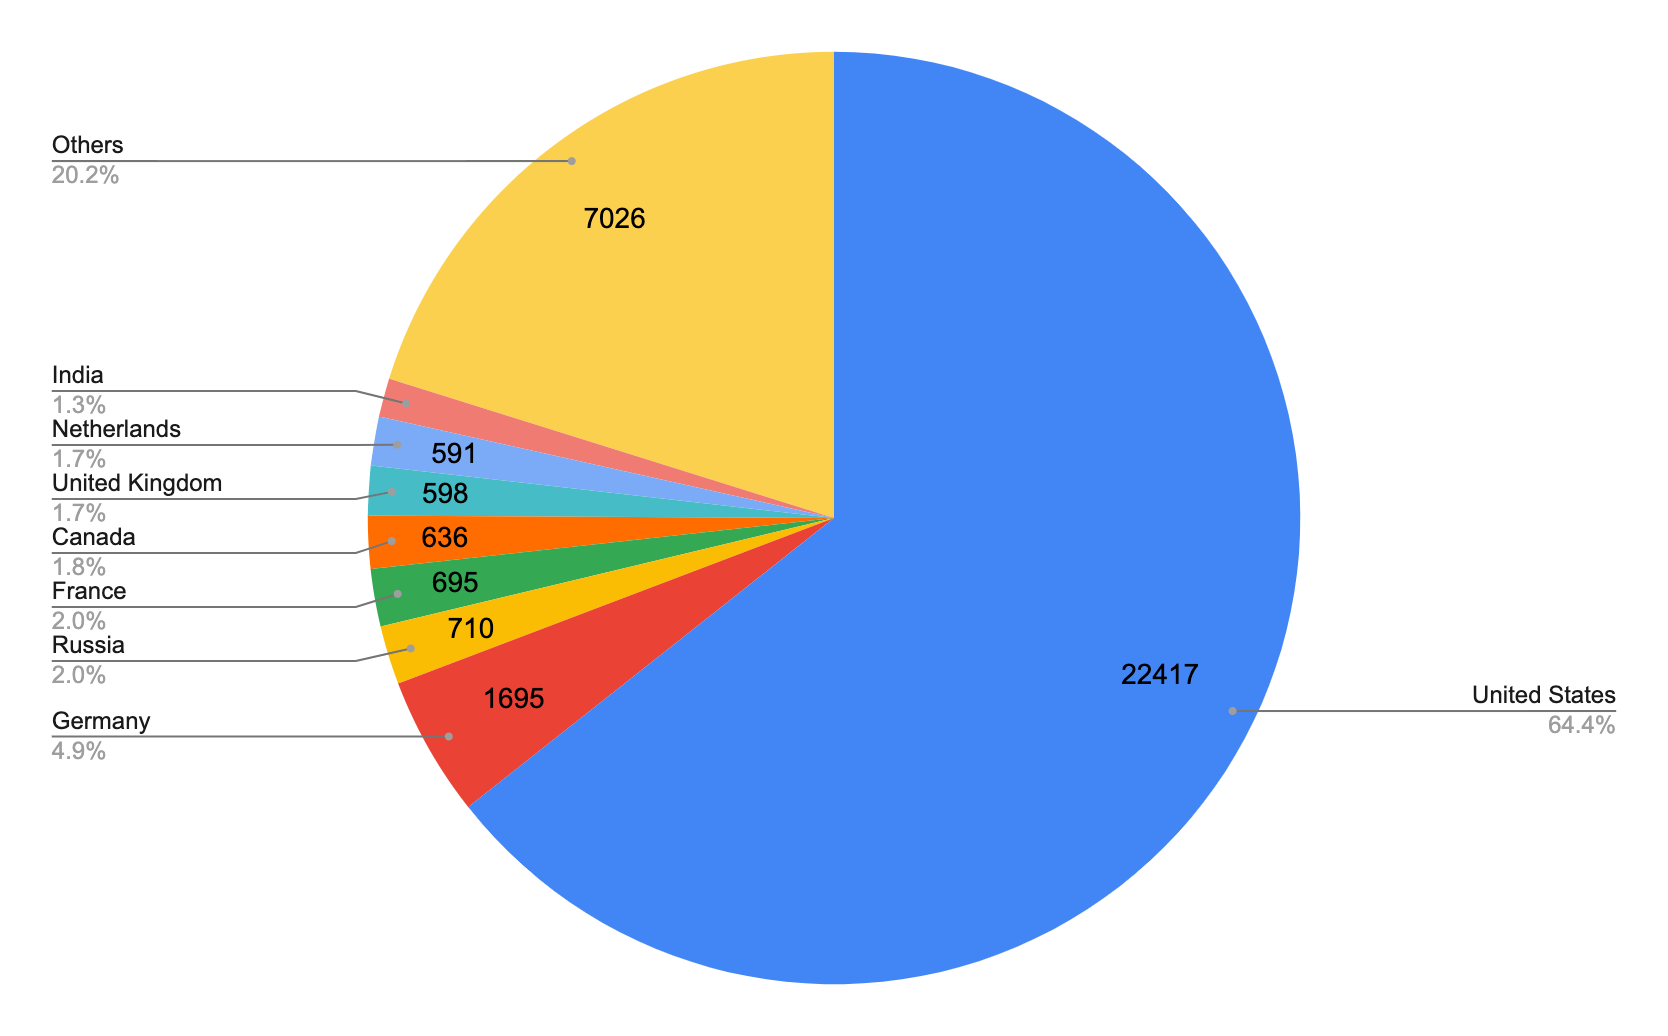 Pie chart showing distribution of originating country of landing URLs from April to June 2022. United States - 64.4%, Germany - 4.9%, Russia - 2.0%, France - 2.0%, Canada - 1.8%, United Kingdom - 1.7%, Netherlands - 1.7%, India - 1.3%, Others - 20.2%